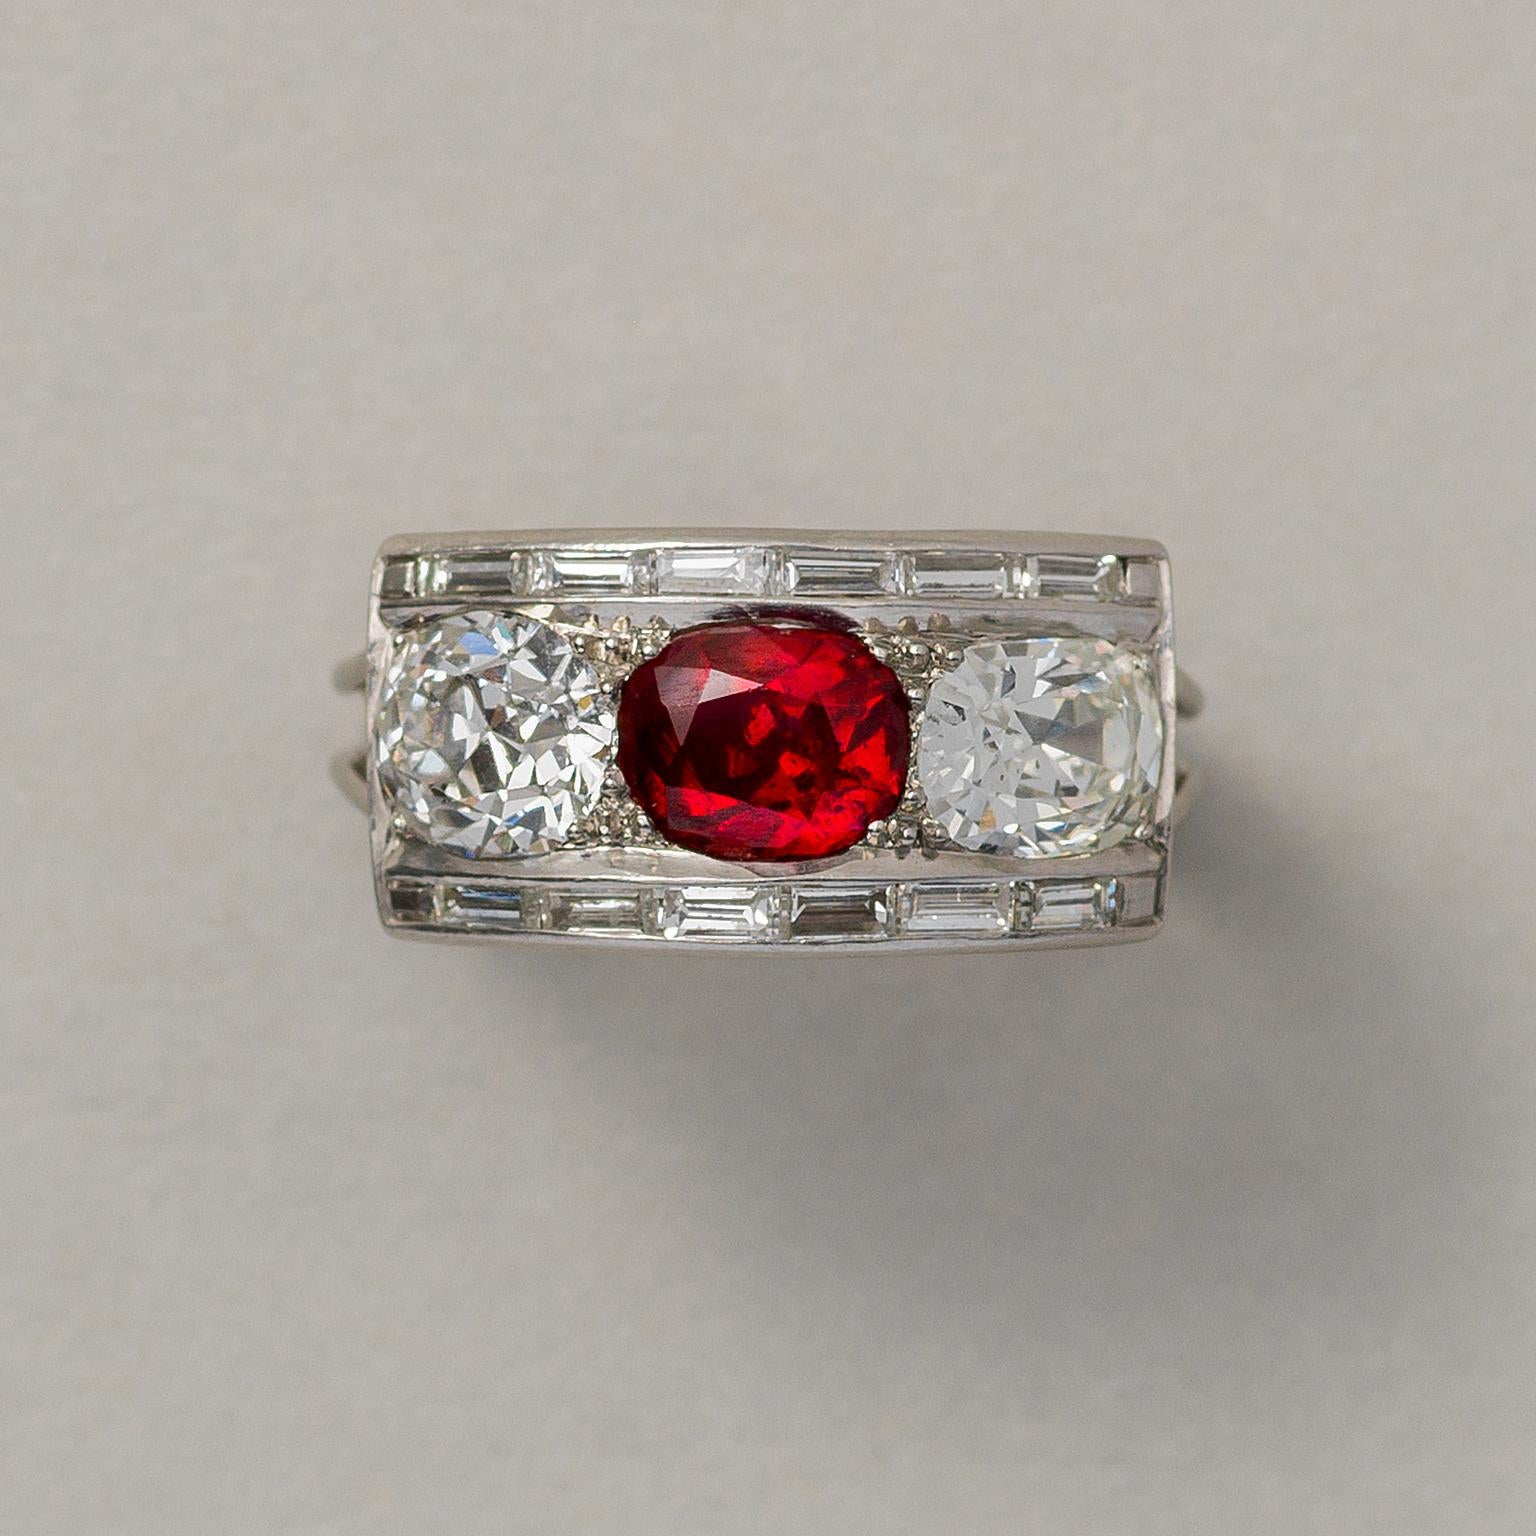 A platinum Art Deco ring, set with a faceted oval unheated natural Burma ruby (app. 2.5 carat 6.2 x 5.0 x 4.2 mm, circa 1.55 carat) and two old-cut diamonds (each app. 1.00 carat in total), framed by two rows of six baquette cut diamonds (app. 0.24